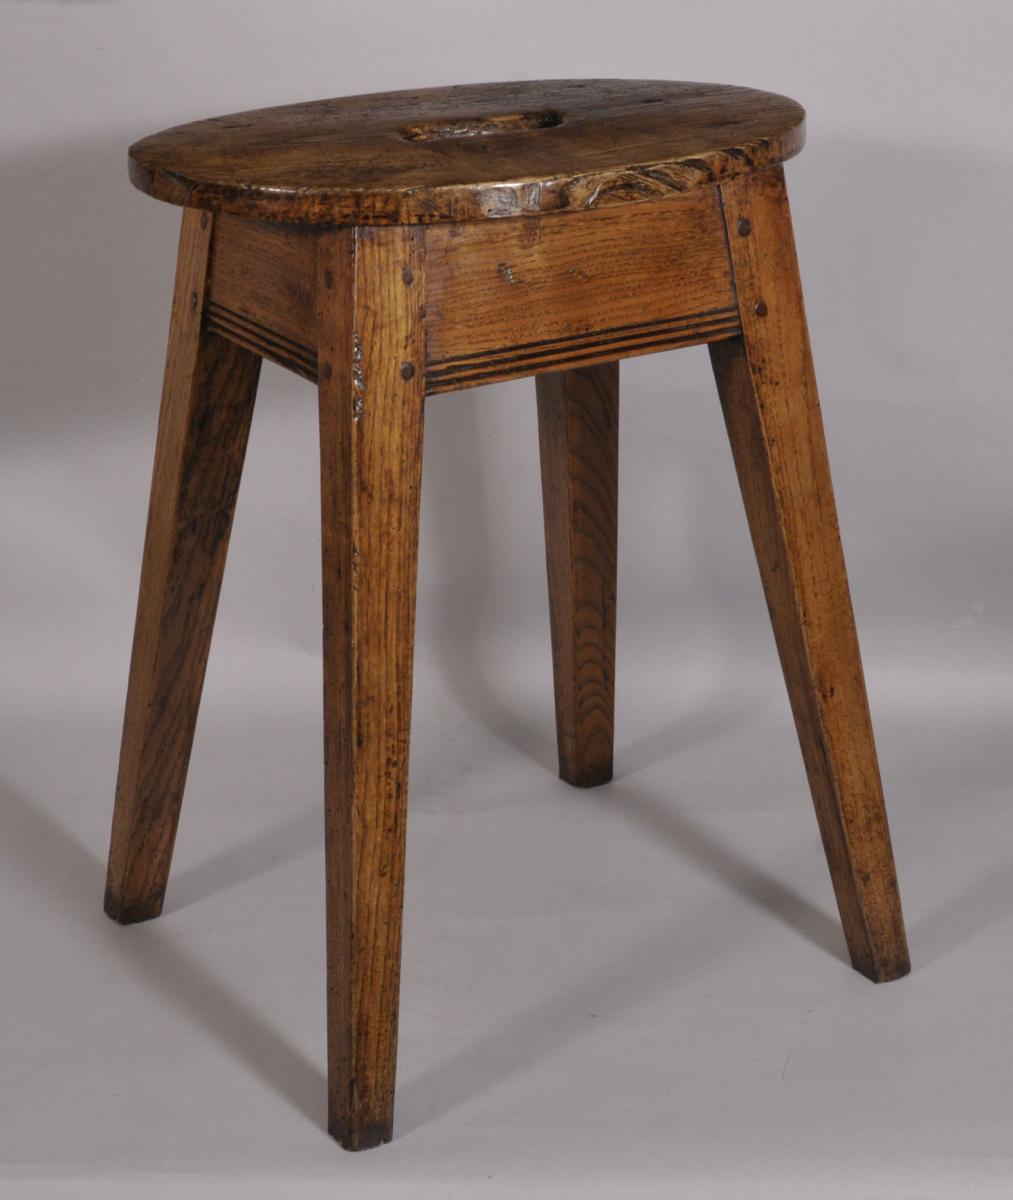 S/3236 Antique Early 19th Century Elm Stool